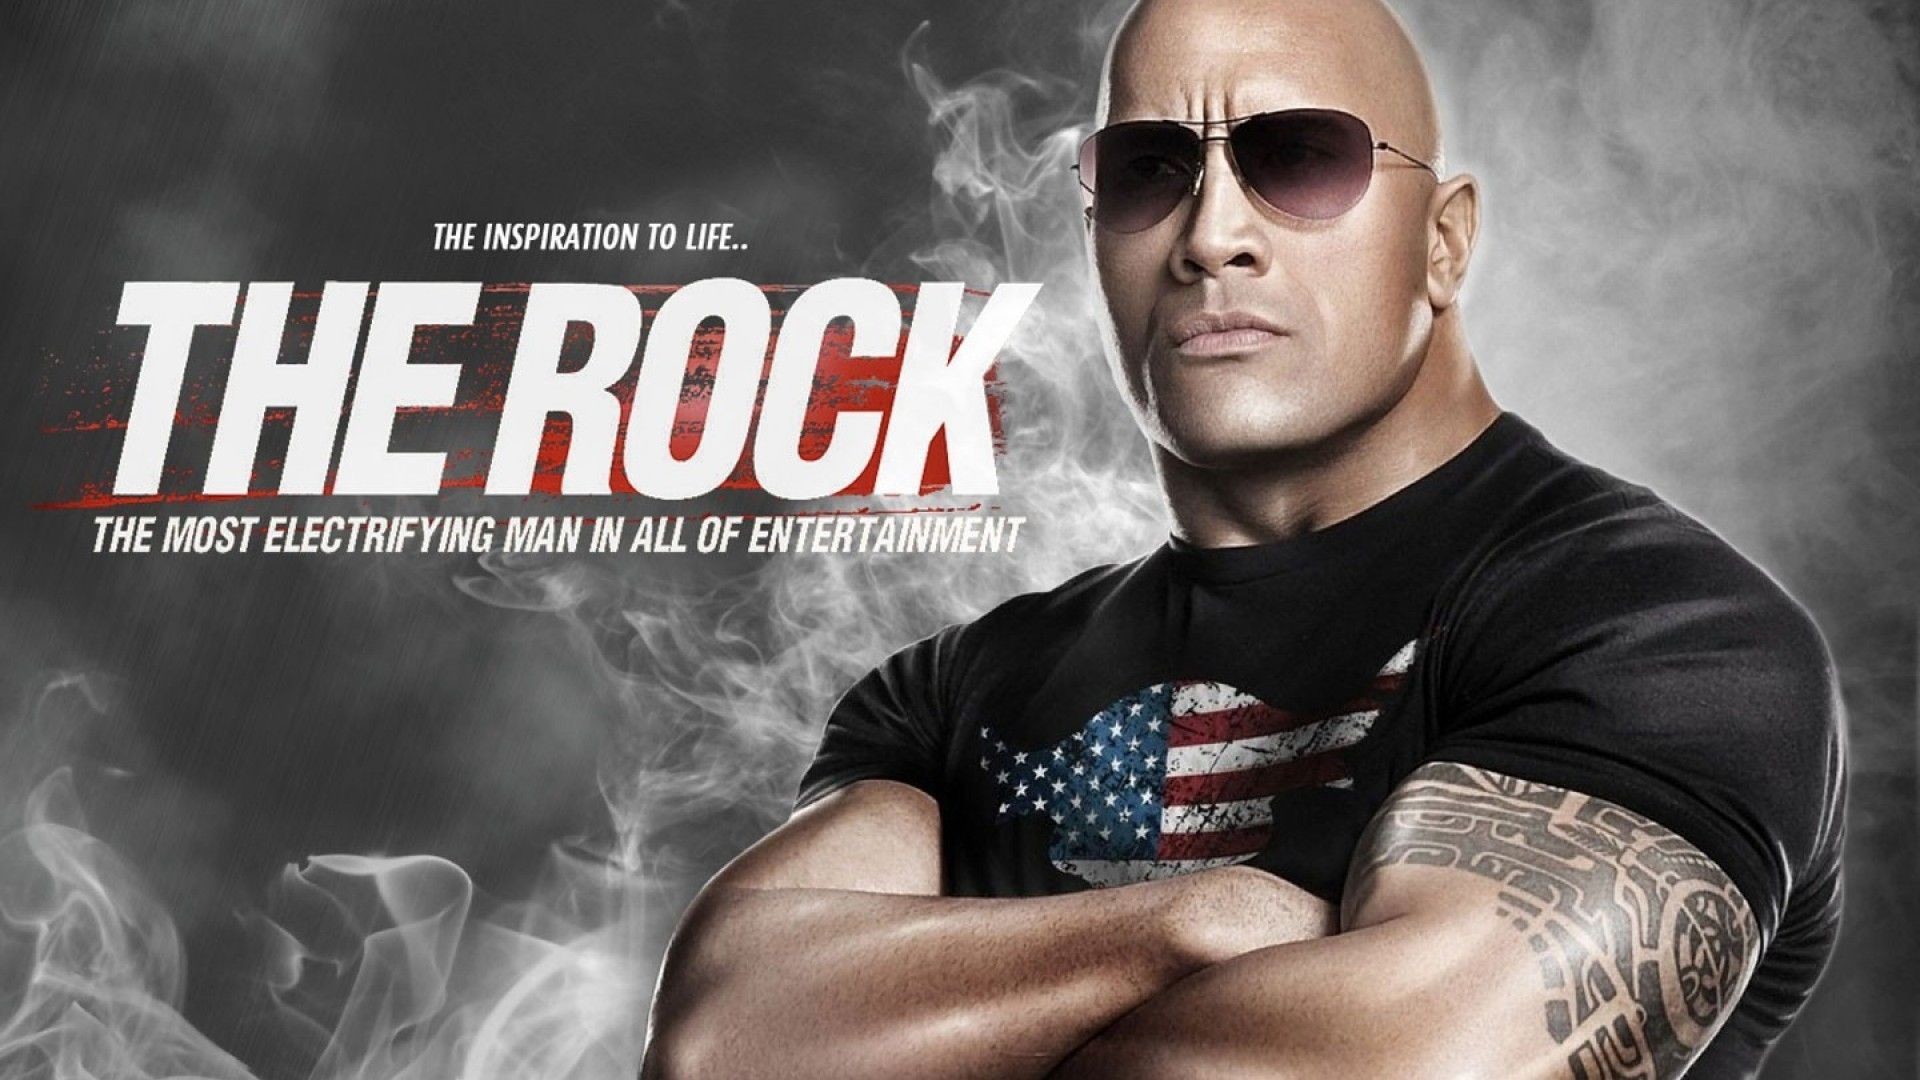 1920x1080 The Rock Hd Wwe | All Wallpapers | Pinterest | Wallpaper and .